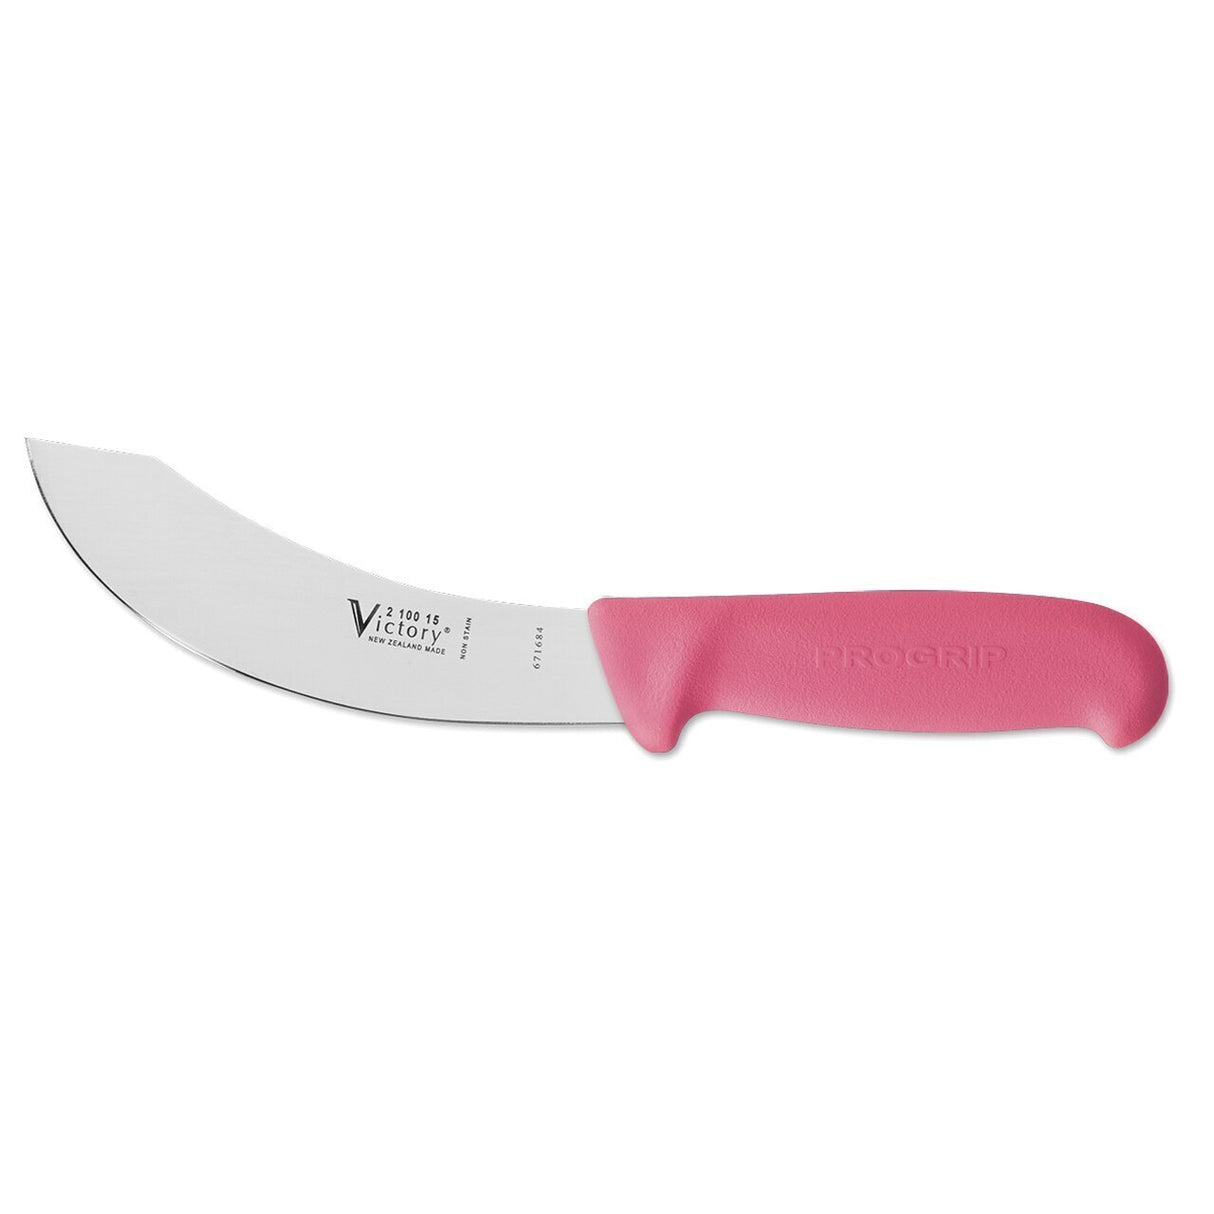 Victory Pink Skinning knife 15cm 2 100 15